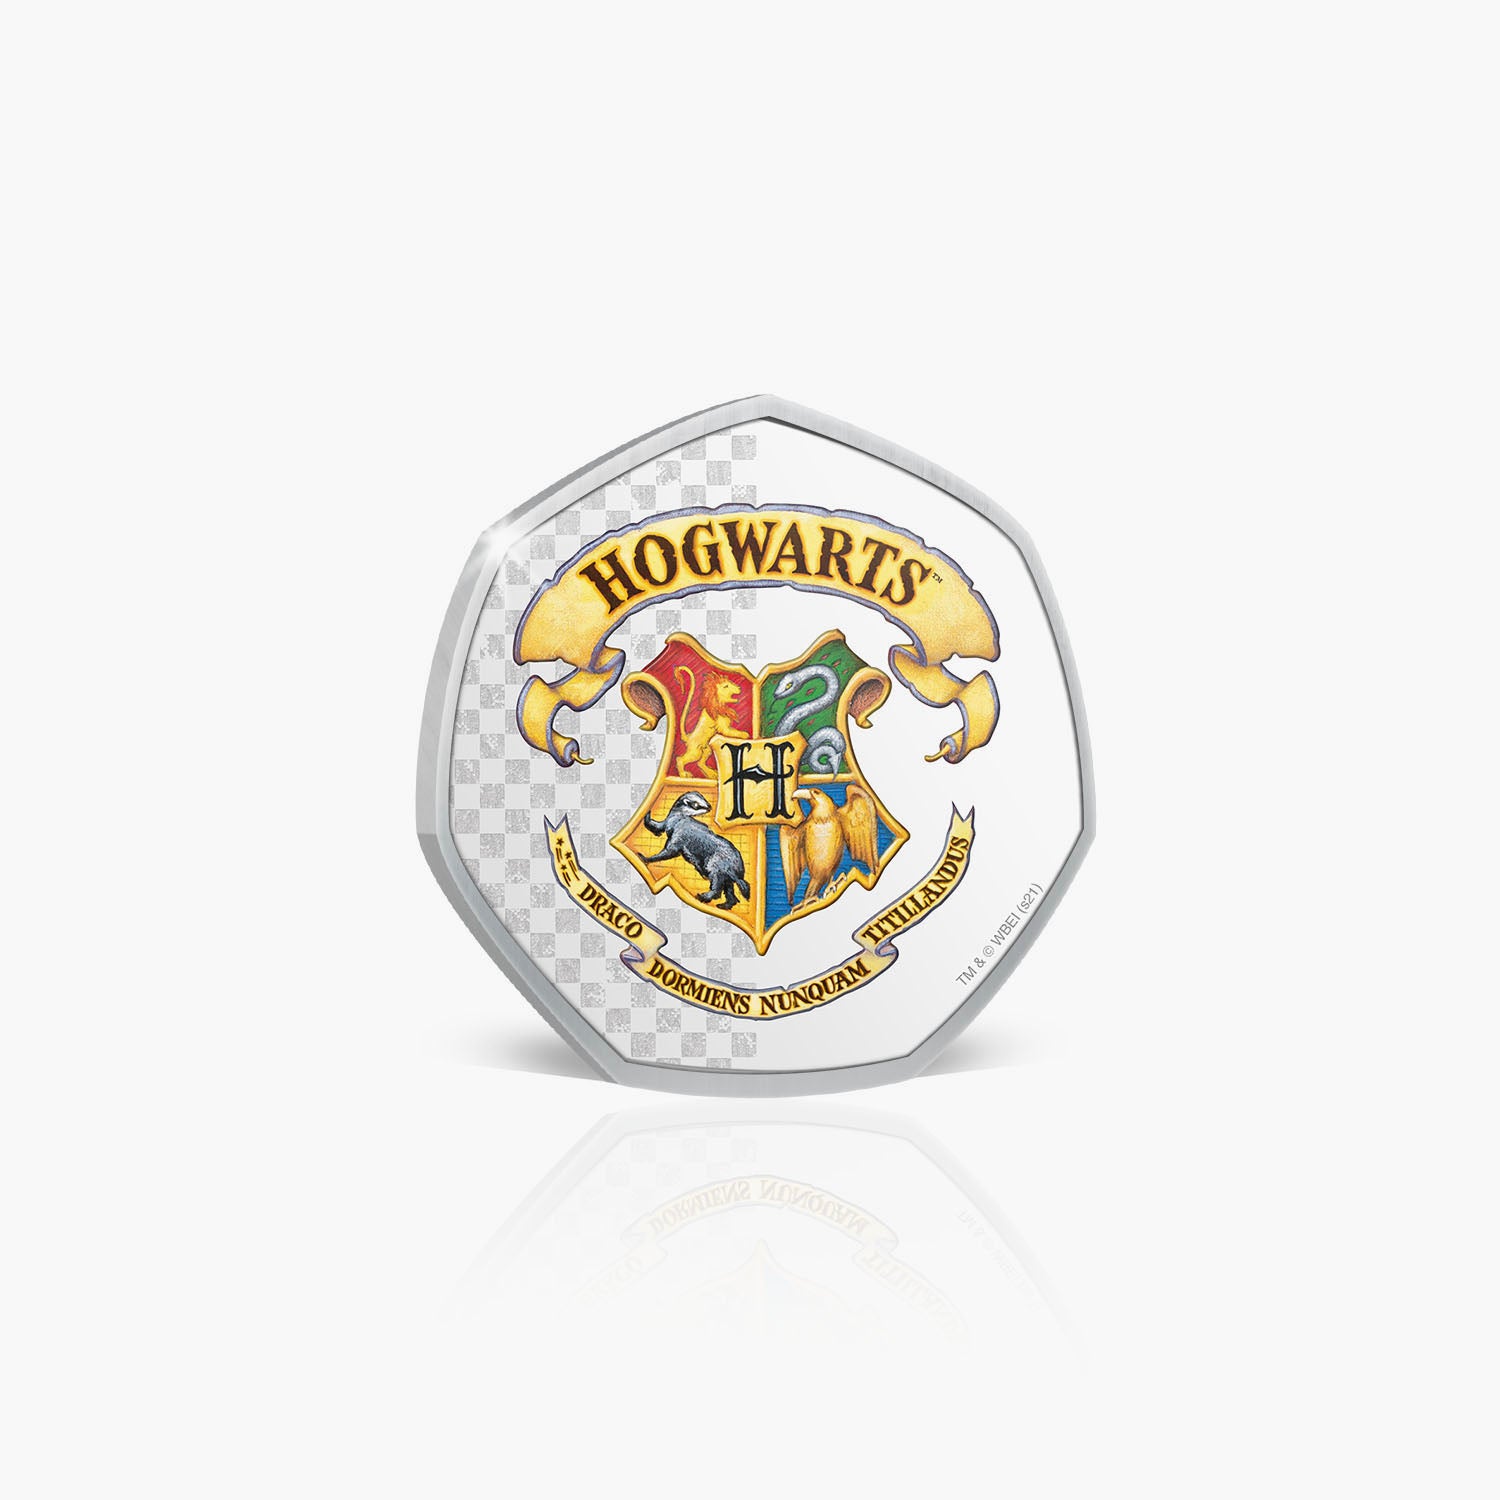 Hogwarts Crest Silver Plated Coin